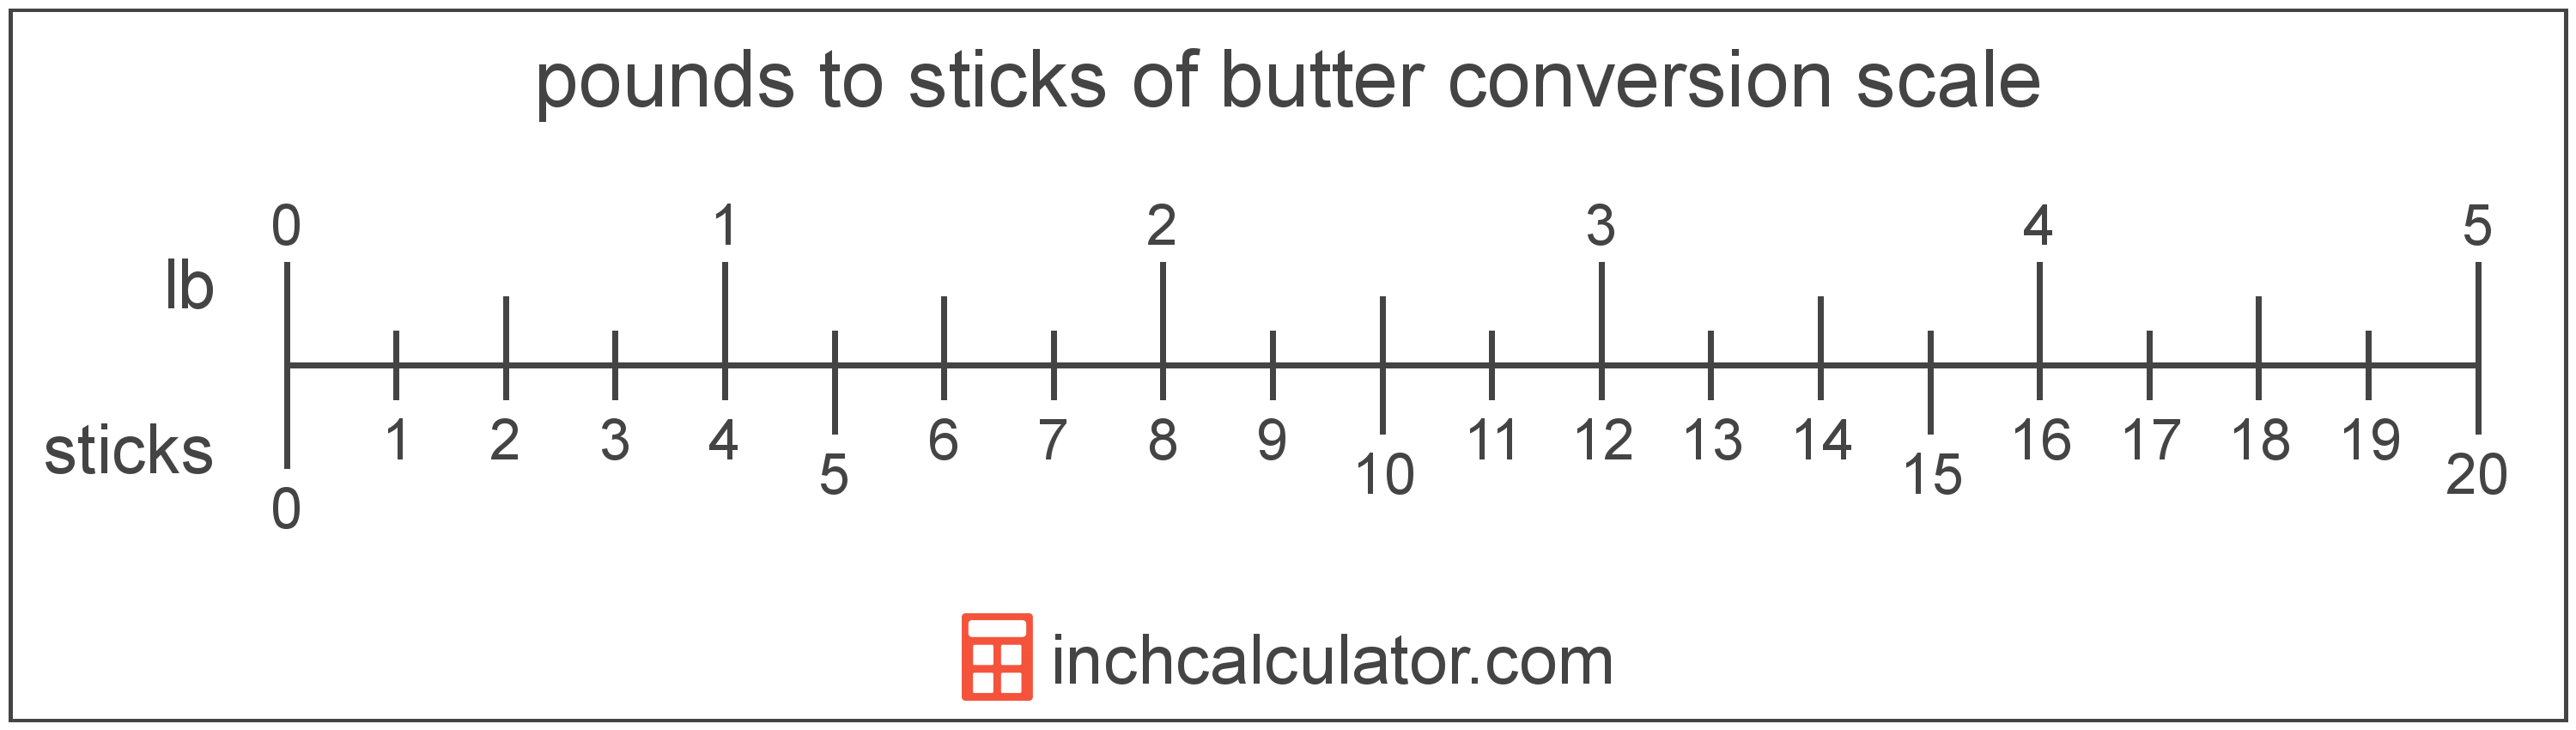 conversion scale showing sticks of butter and equivalent pounds butter values